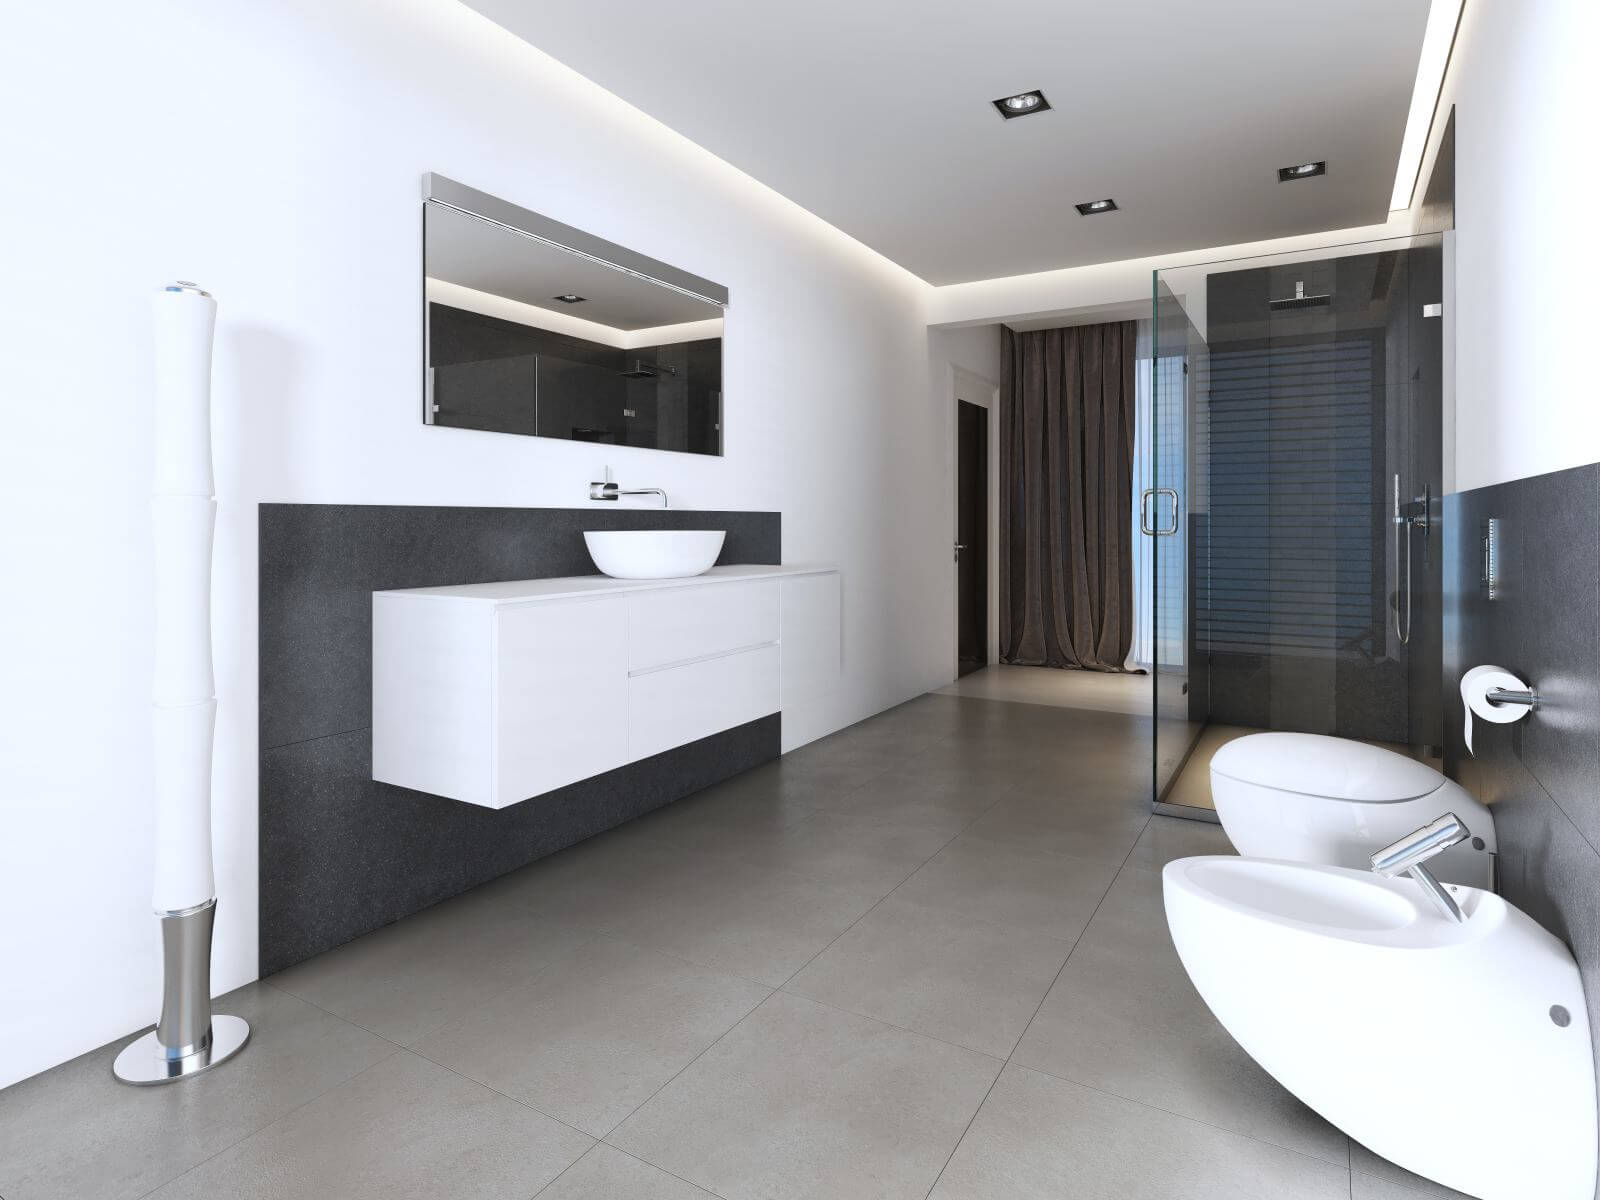 Contemporary bathroom with shower and bath in white and gray colors. 3D rendering